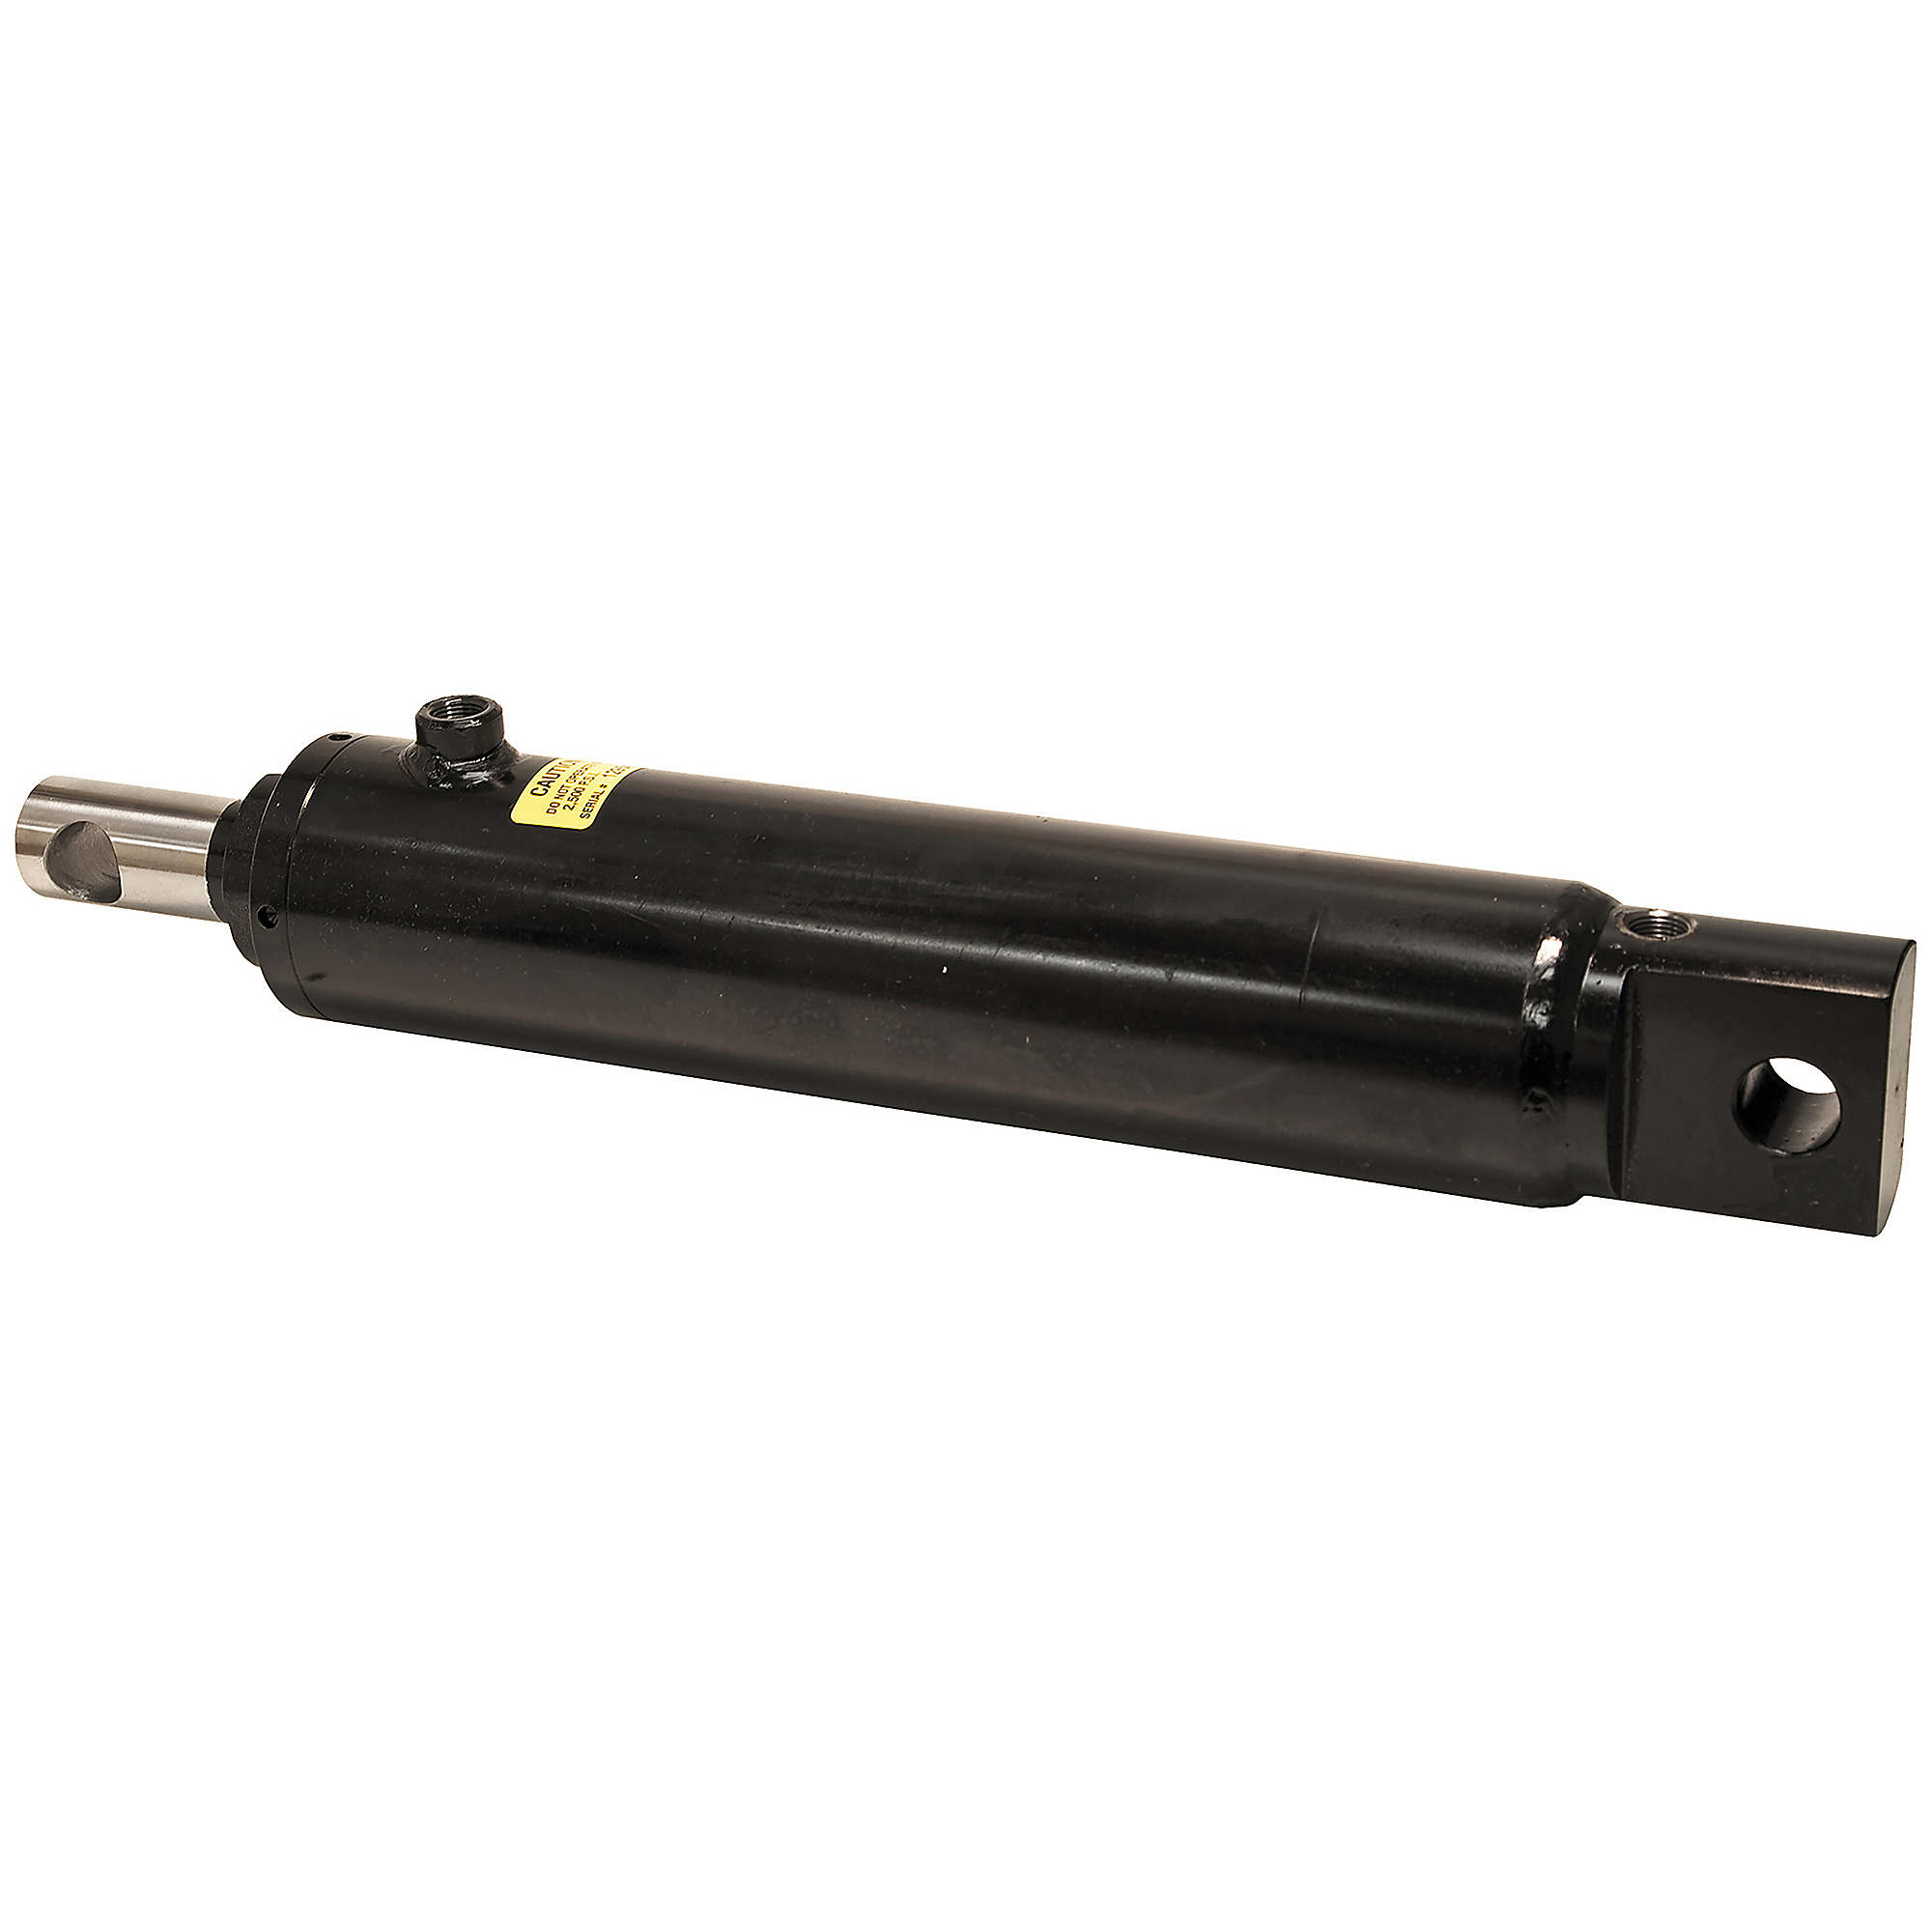 Buyers Products, SAM Double-Acting Hydraulic Cylinder OEM: 99806239 Bore Diameter 3 in, Stroke 10 in, Rod Diameter 1.5 in, Model 1304550